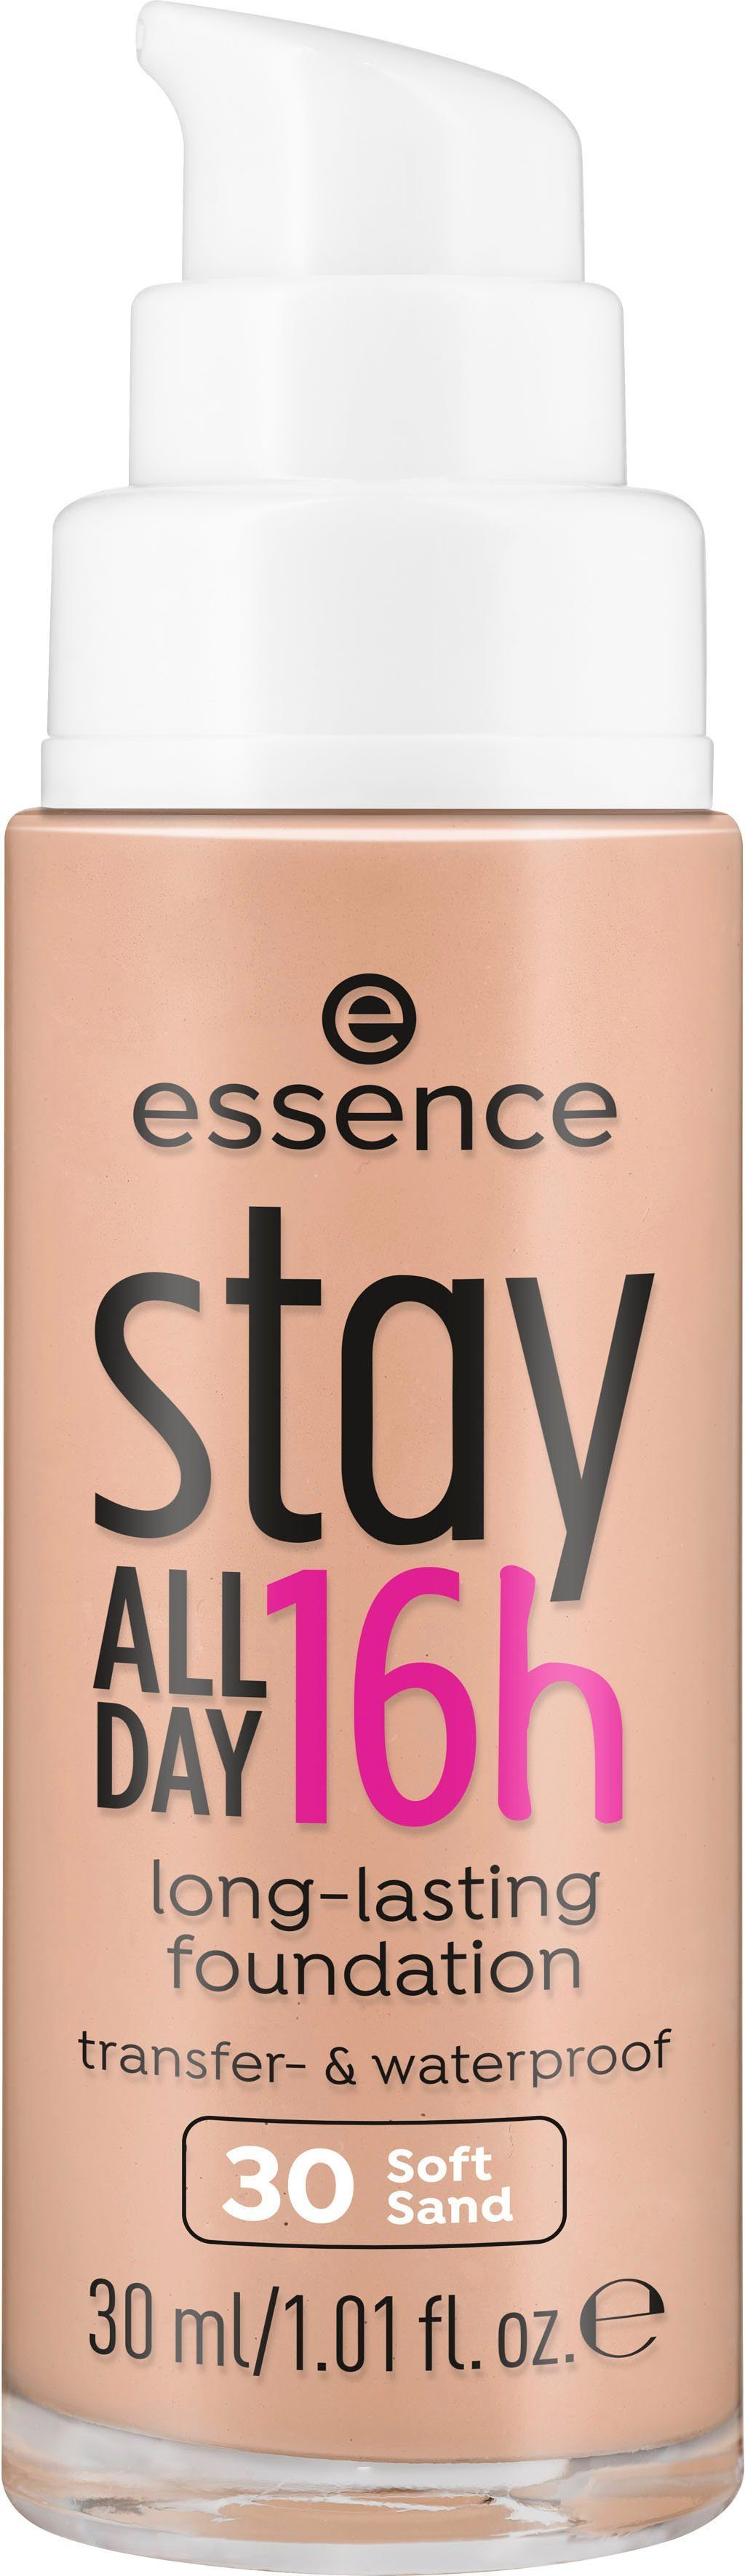 Essence Foundation 16h ALL DAY Soft 3-tlg. stay Sand long-lasting